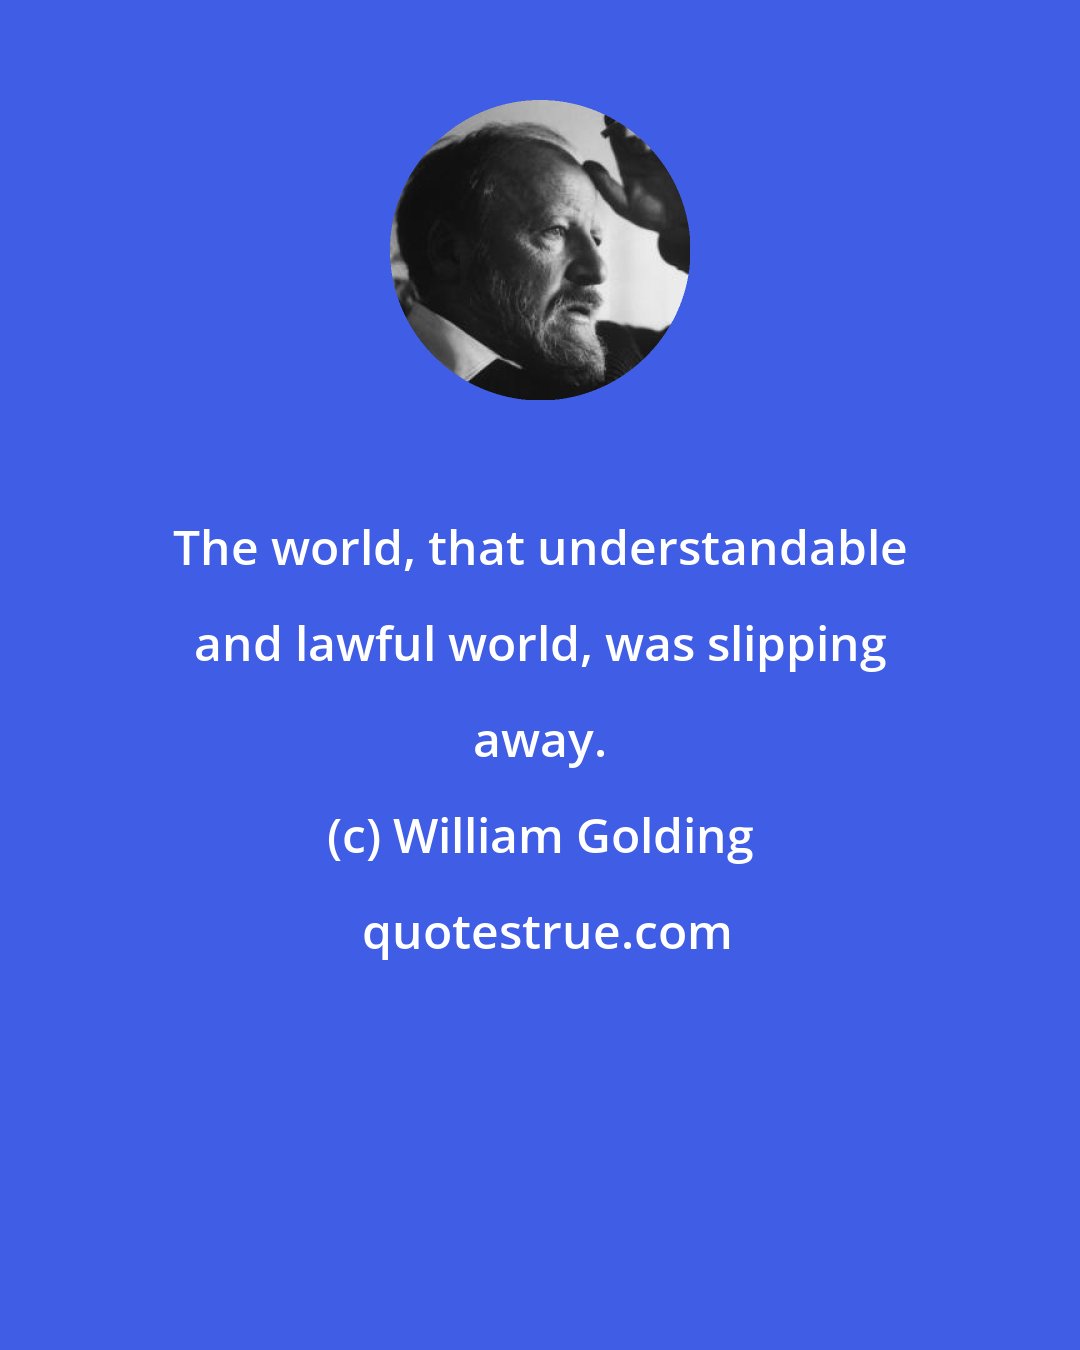 William Golding: The world, that understandable and lawful world, was slipping away.